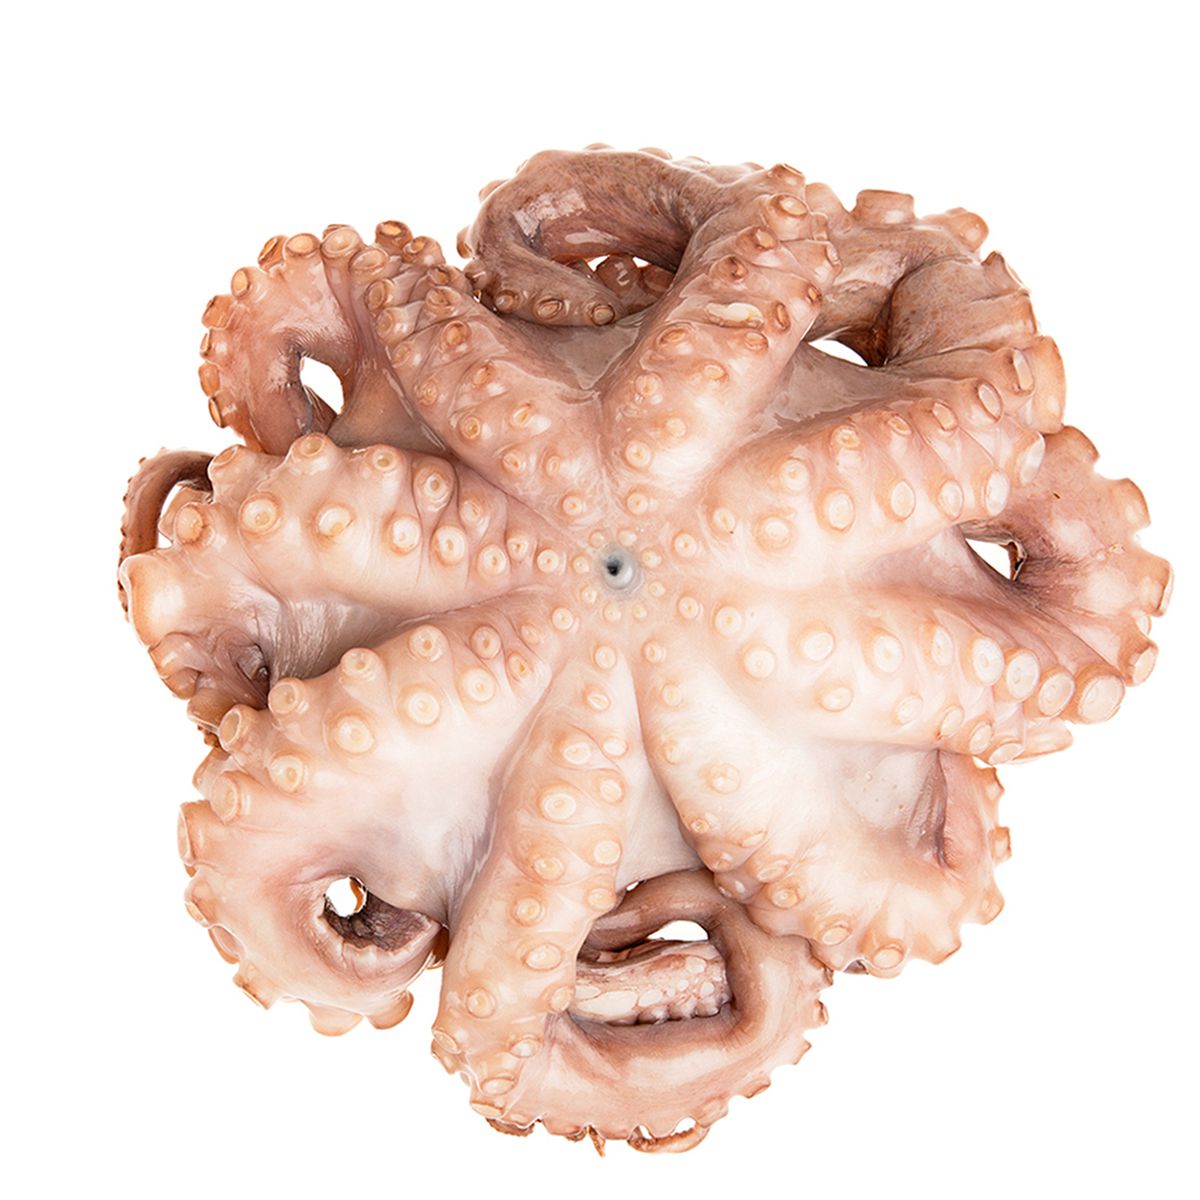 Val'S Ocean Pacific Seafood Tumbled and Tenderized Mediterranean Octopus IQF 4-6 LB